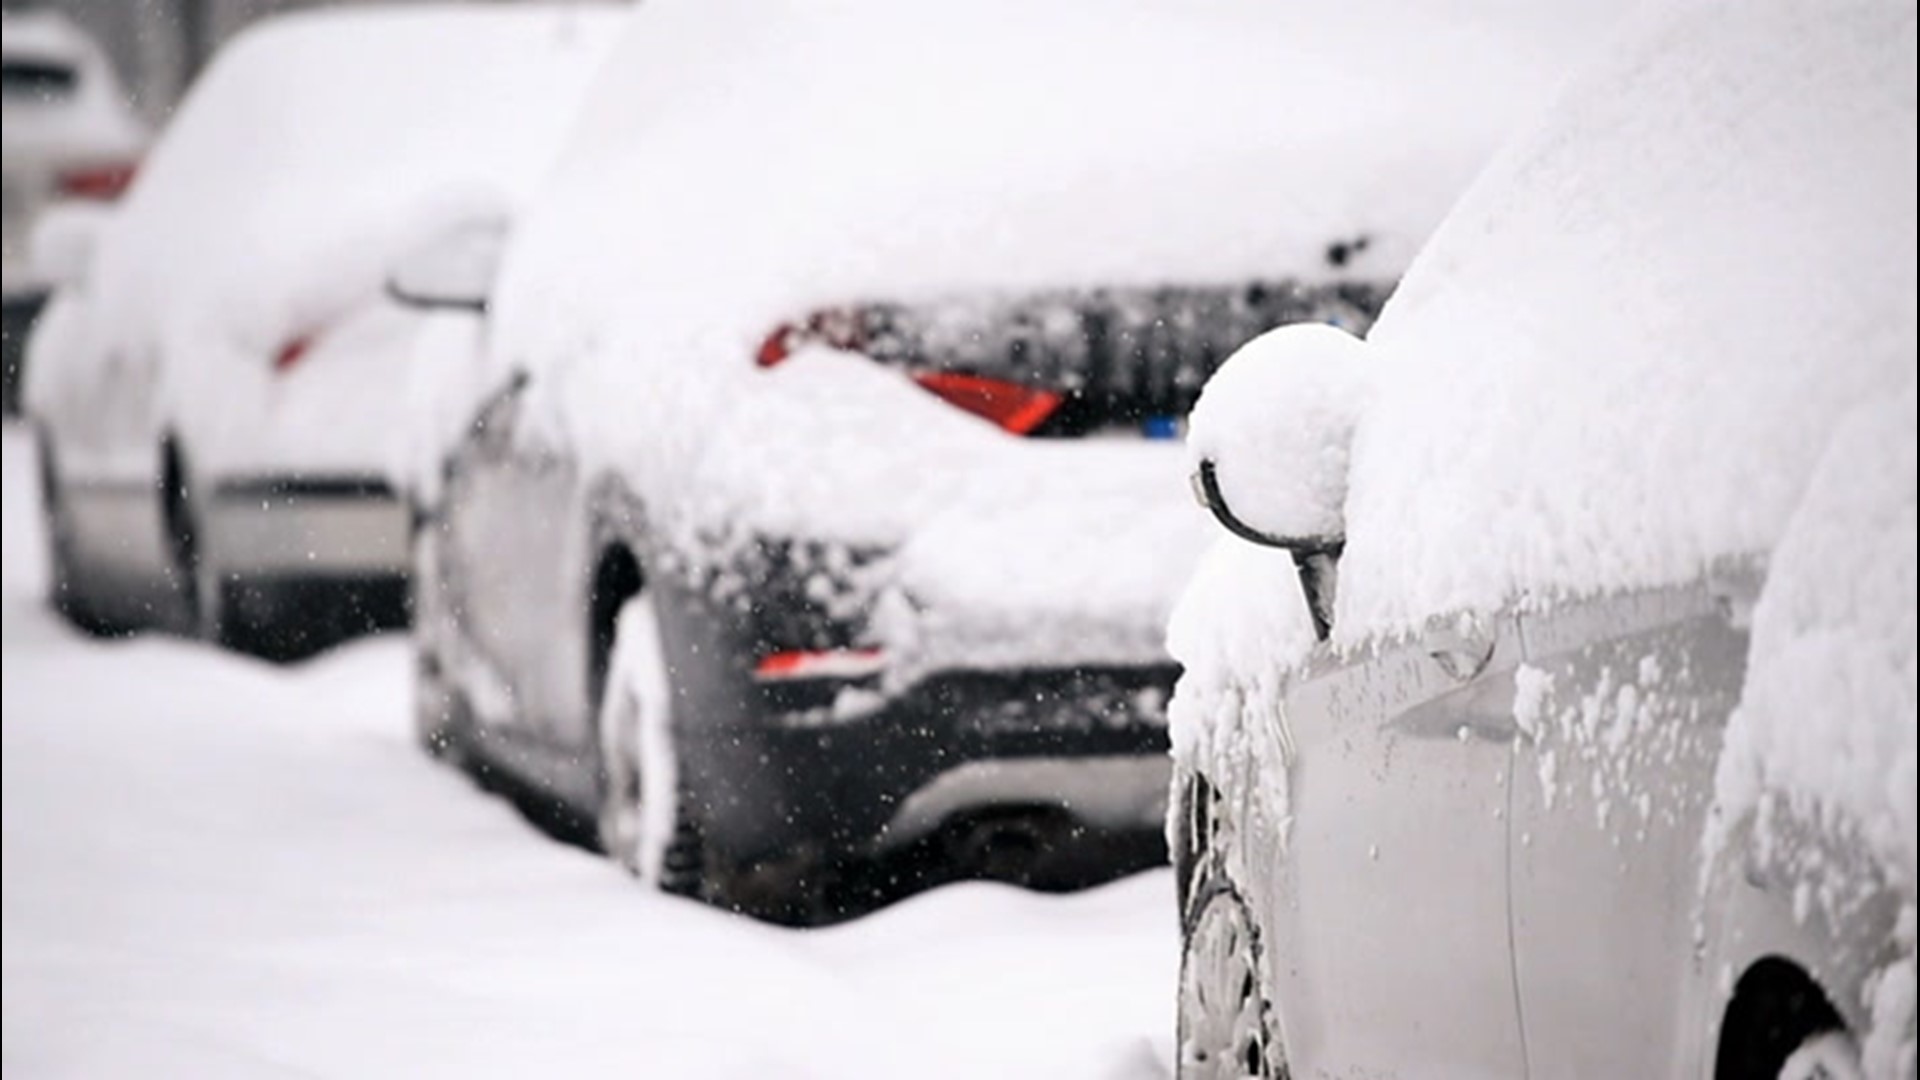 Parking your car illegally during winter snow removal can be dangerous not only for yourself, but also for your vehicle and any people plowing roads.